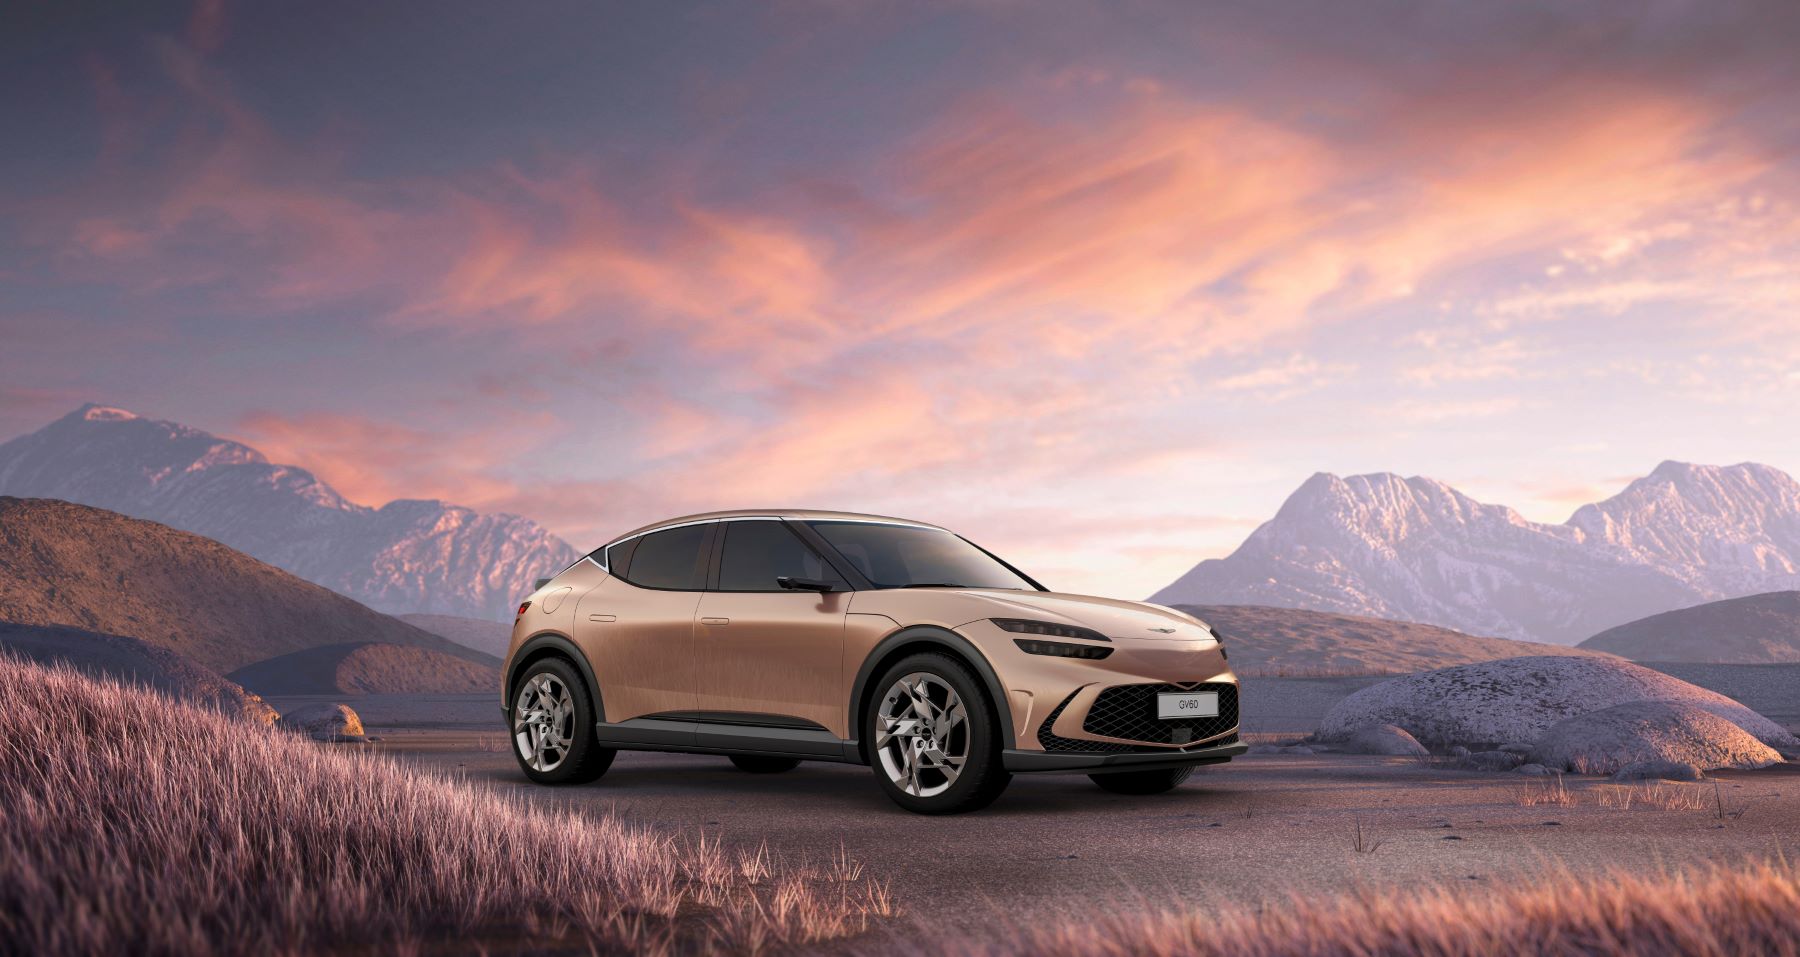 A bronze 2023 Genesis GV60 electric SUV model parked in a mountain field bathed in light from a purple cloudy sky